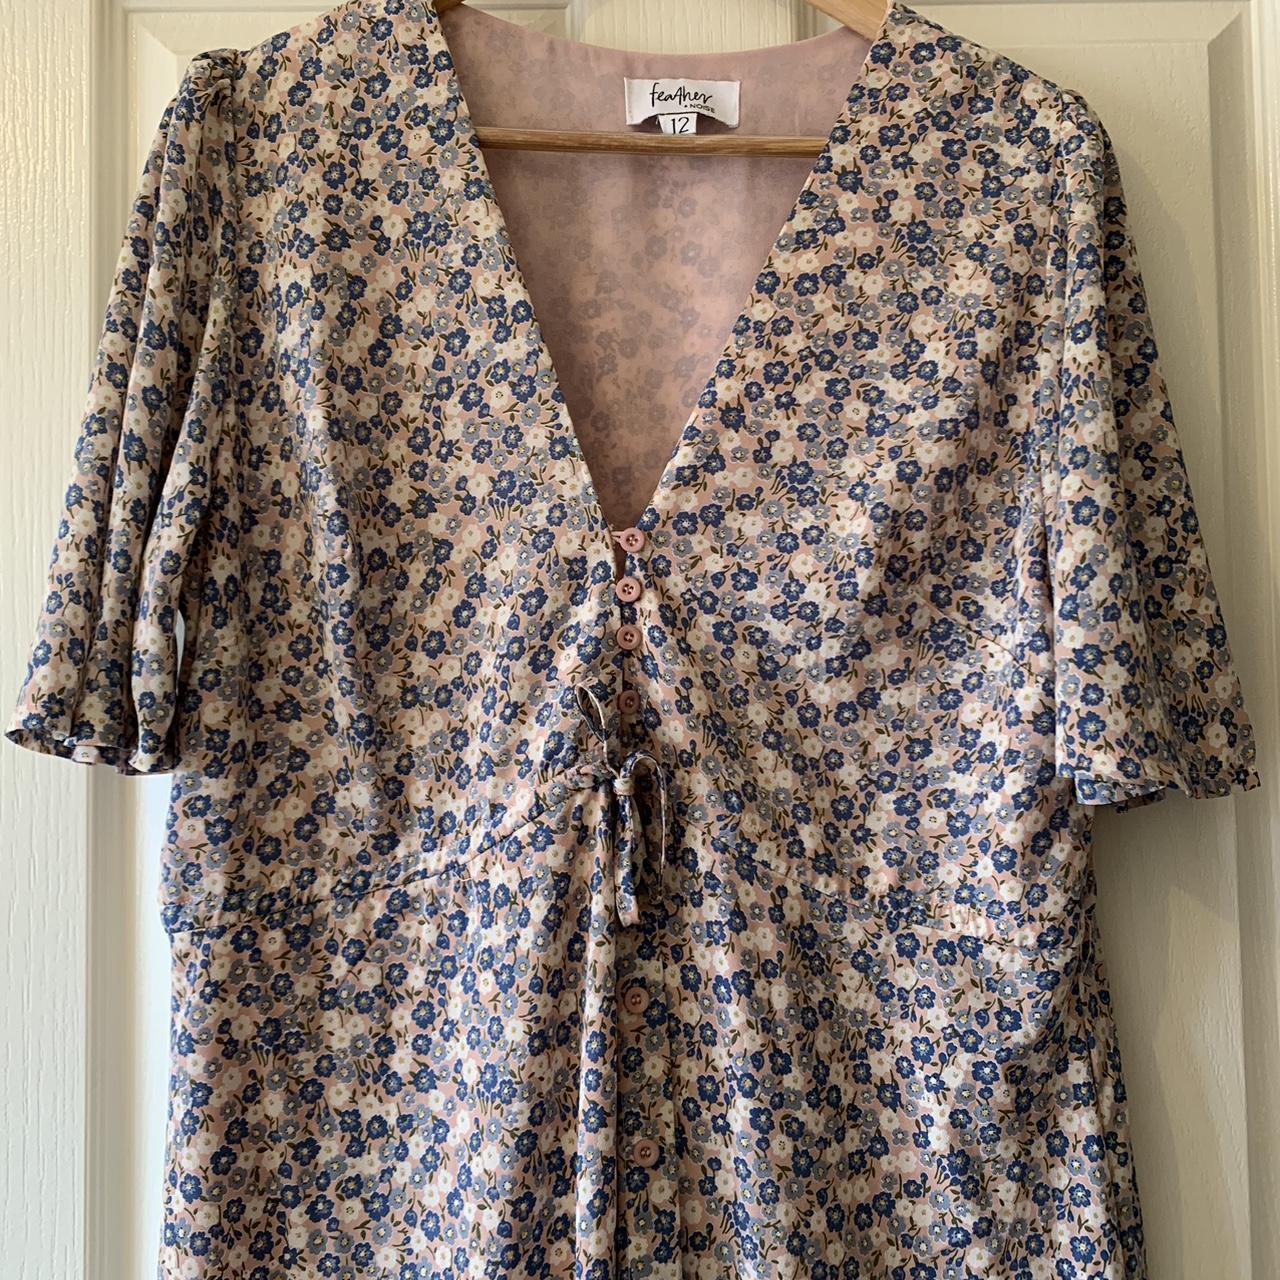 Feather and Noise Jackie Dress Size 12 In excellent... - Depop